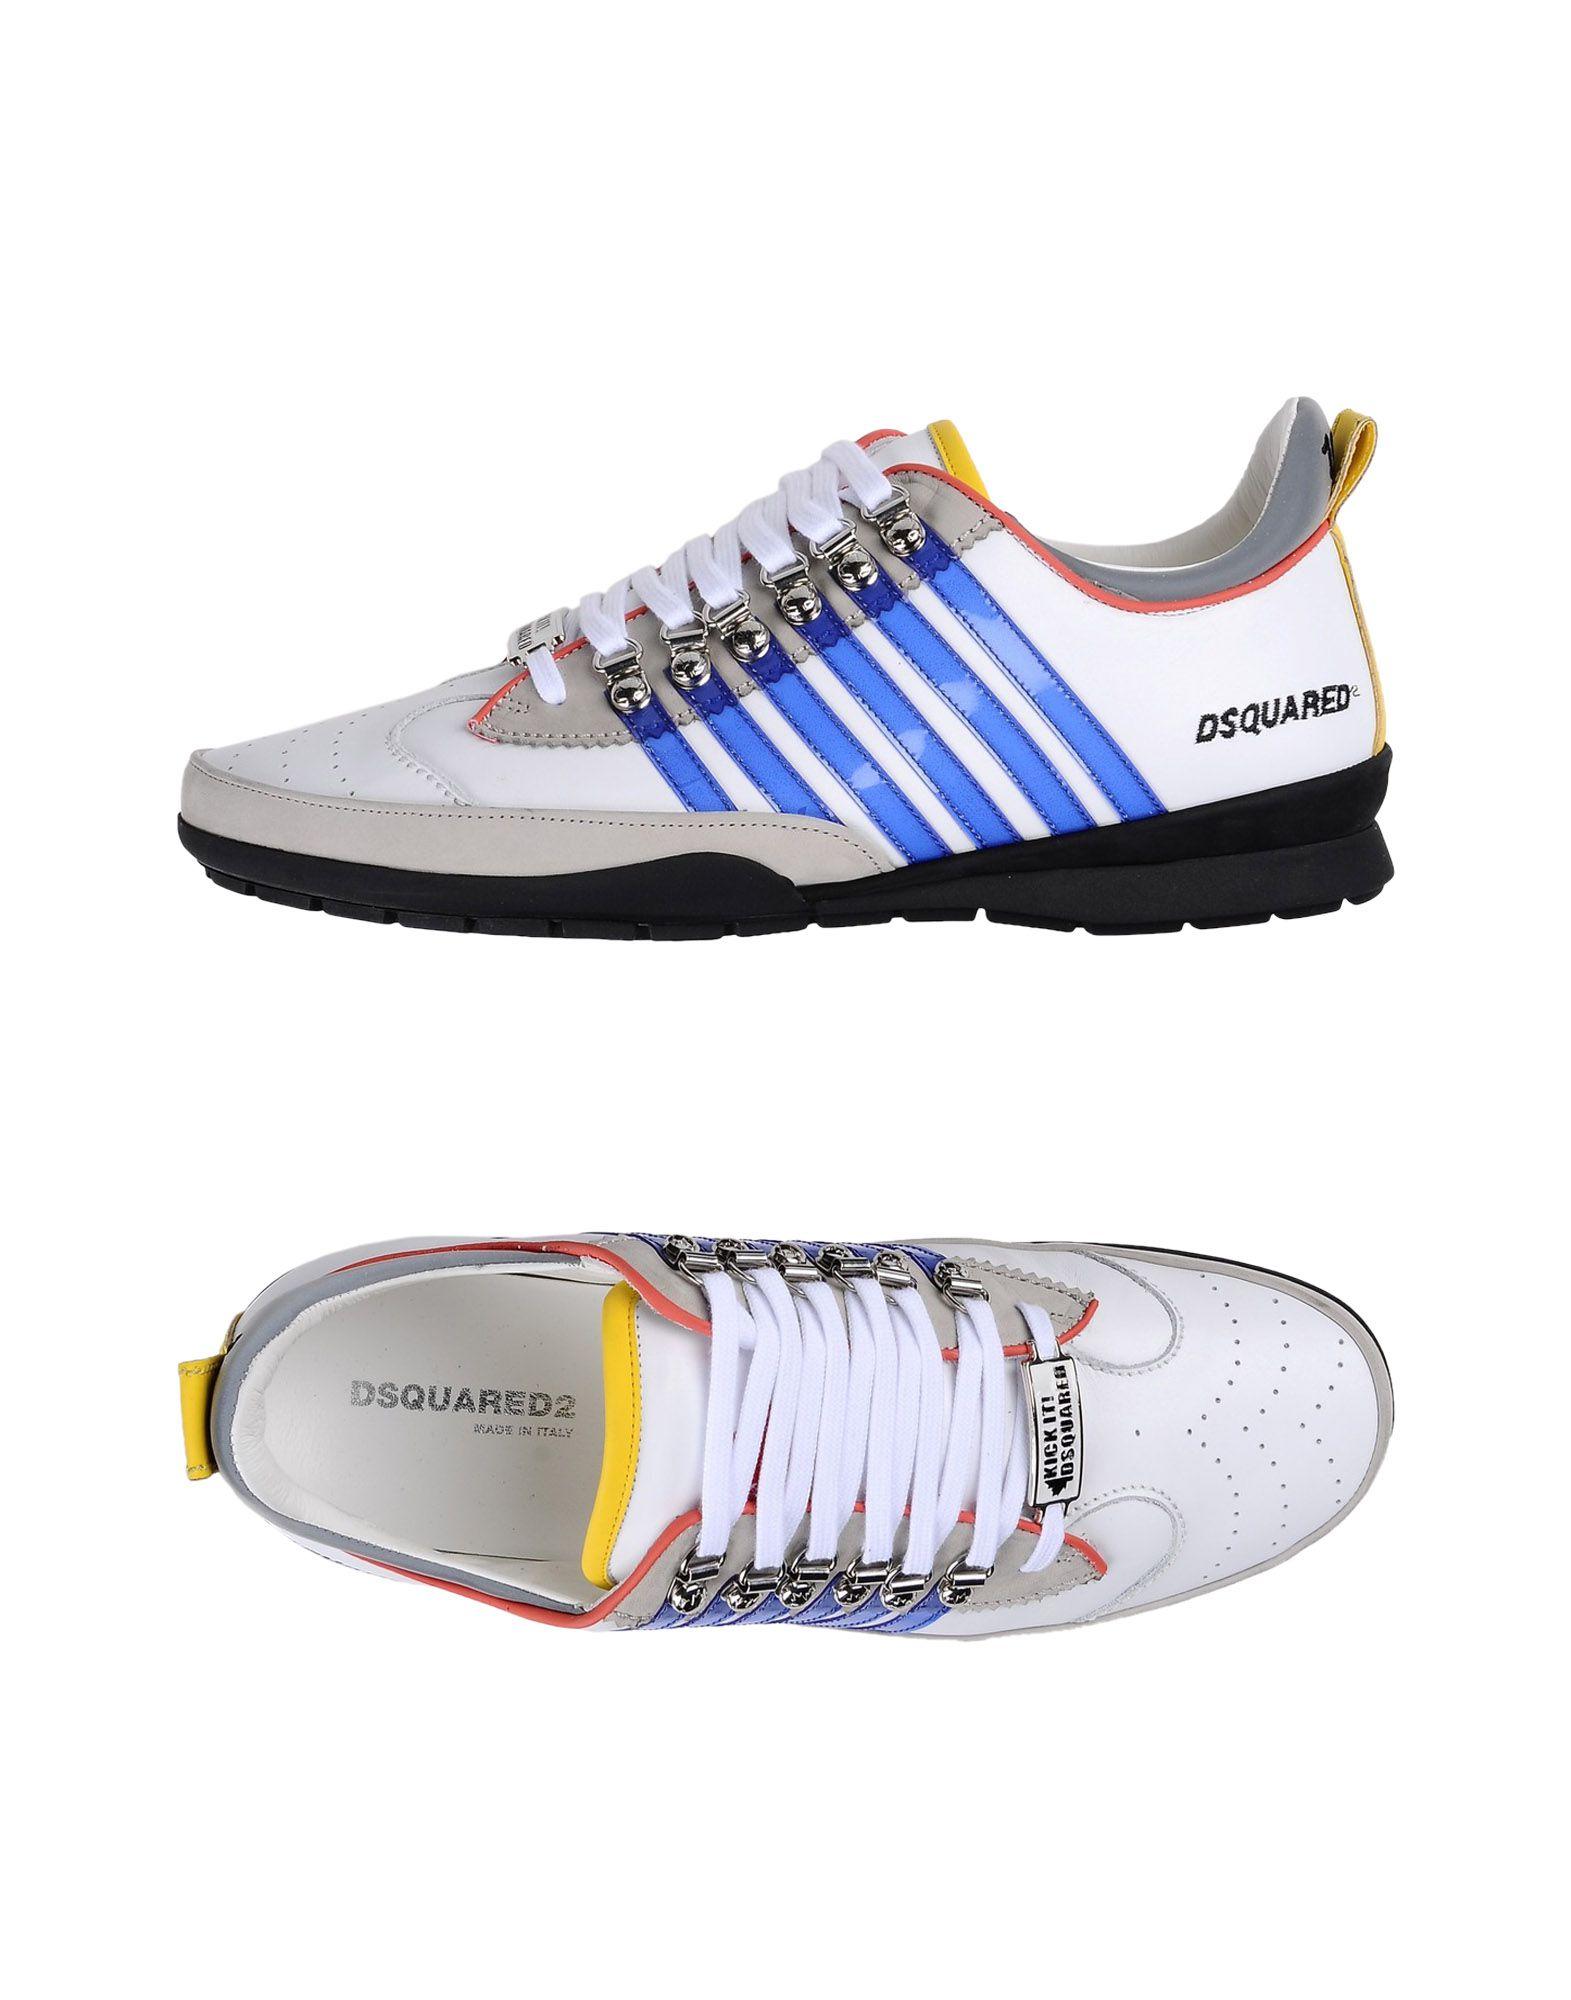 dsquared sneakers on sale